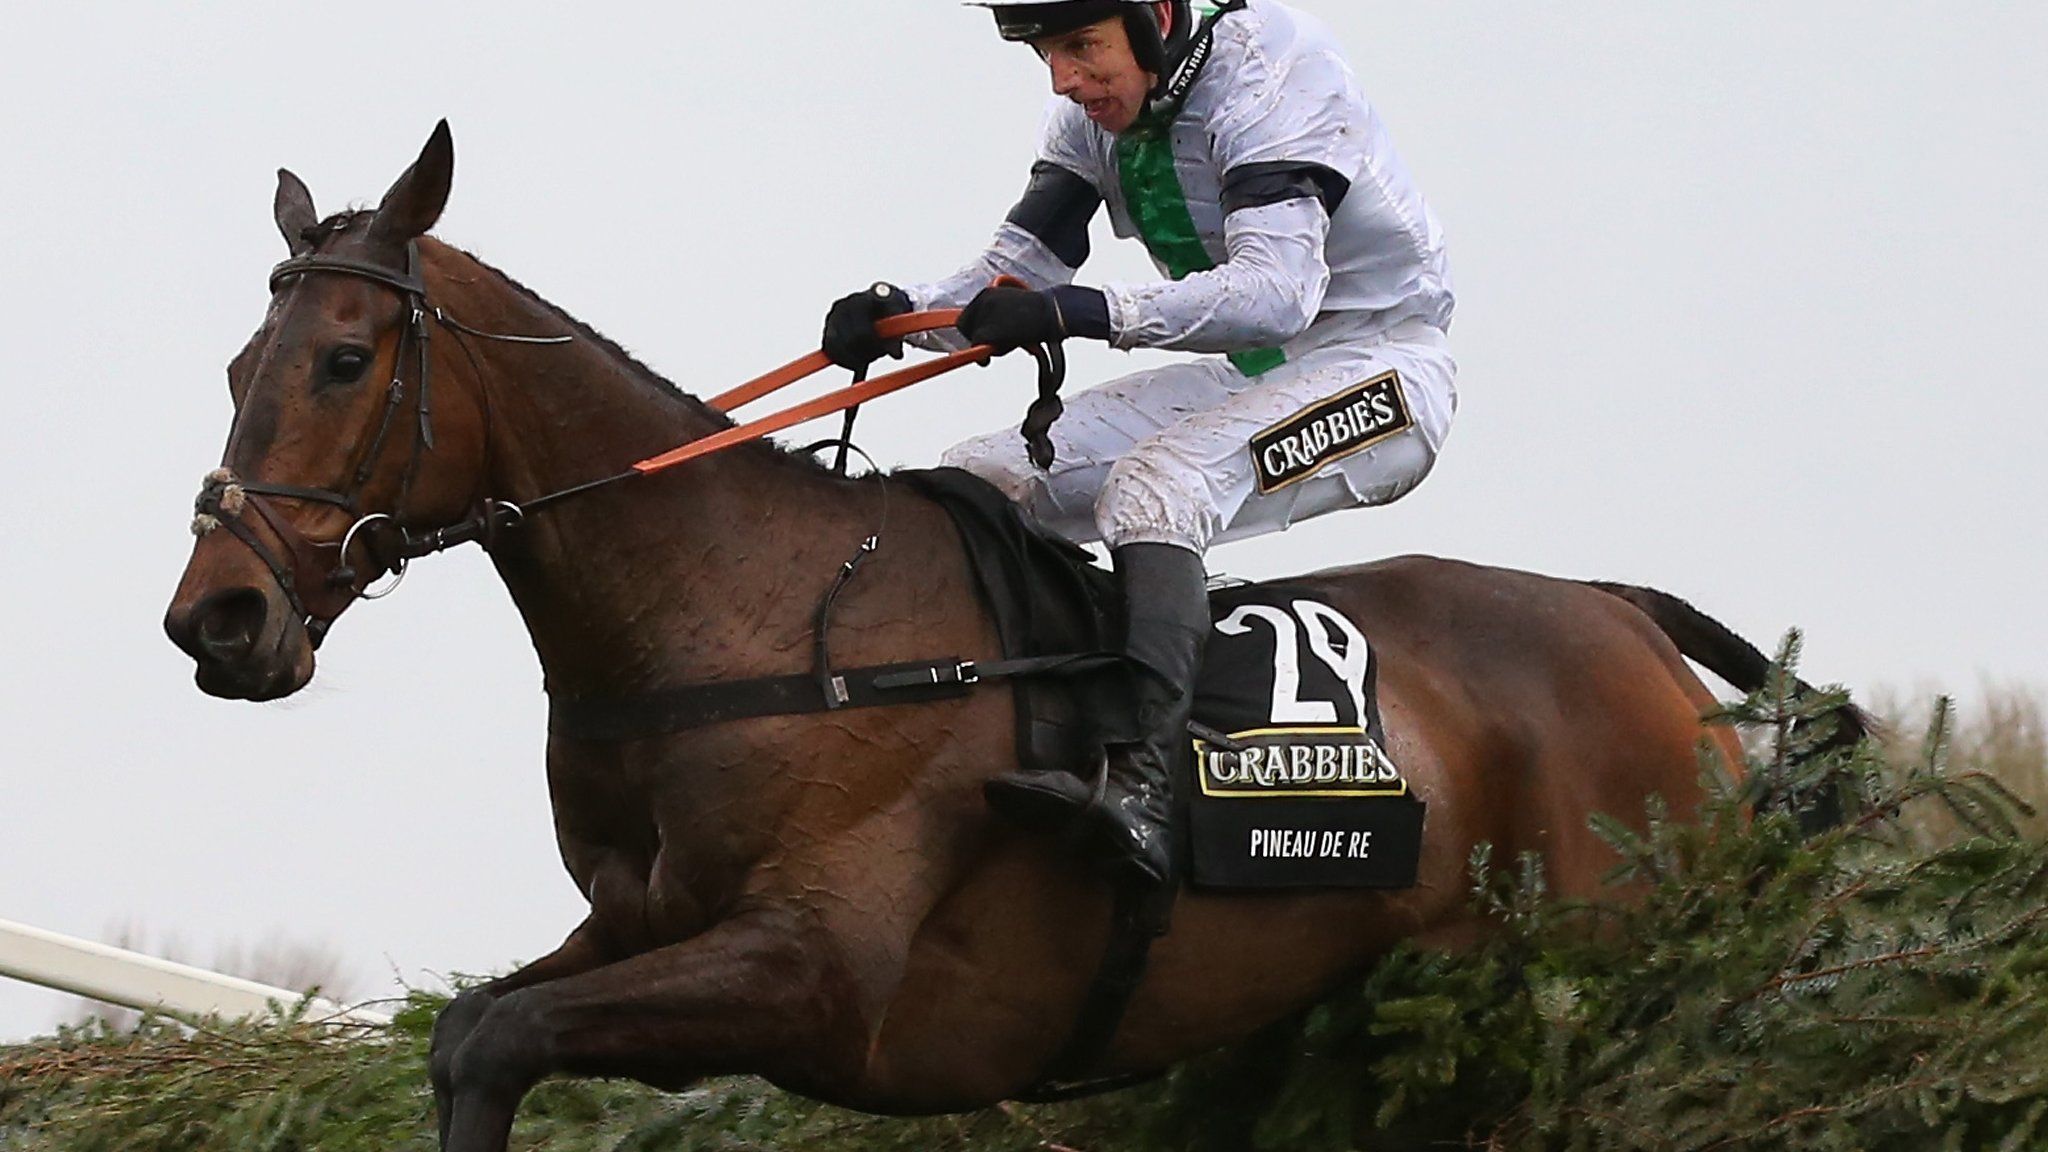 Pineau de Re en route to victory in the 2014 Grand National